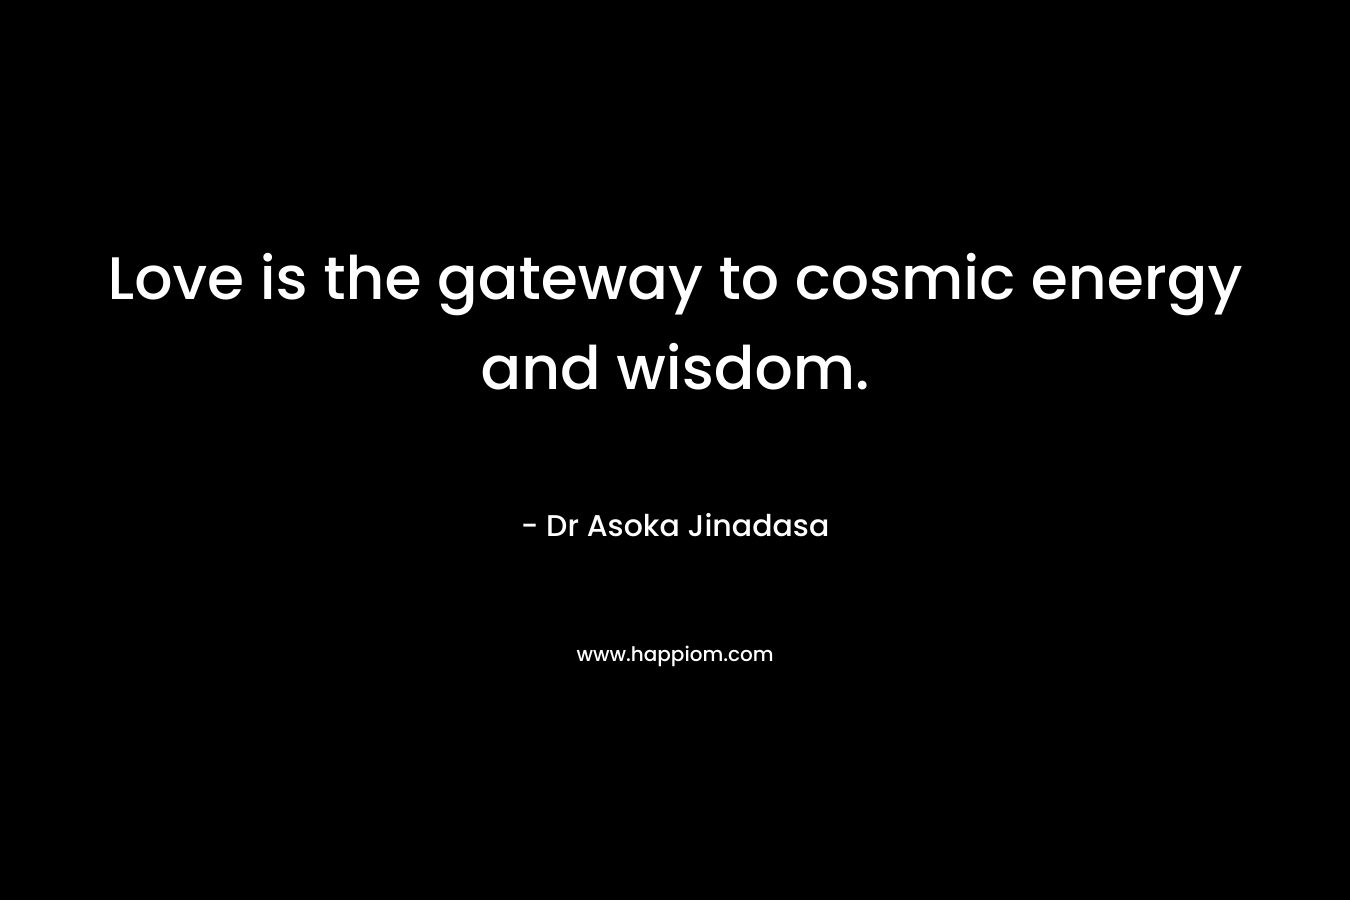 Love is the gateway to cosmic energy and wisdom.